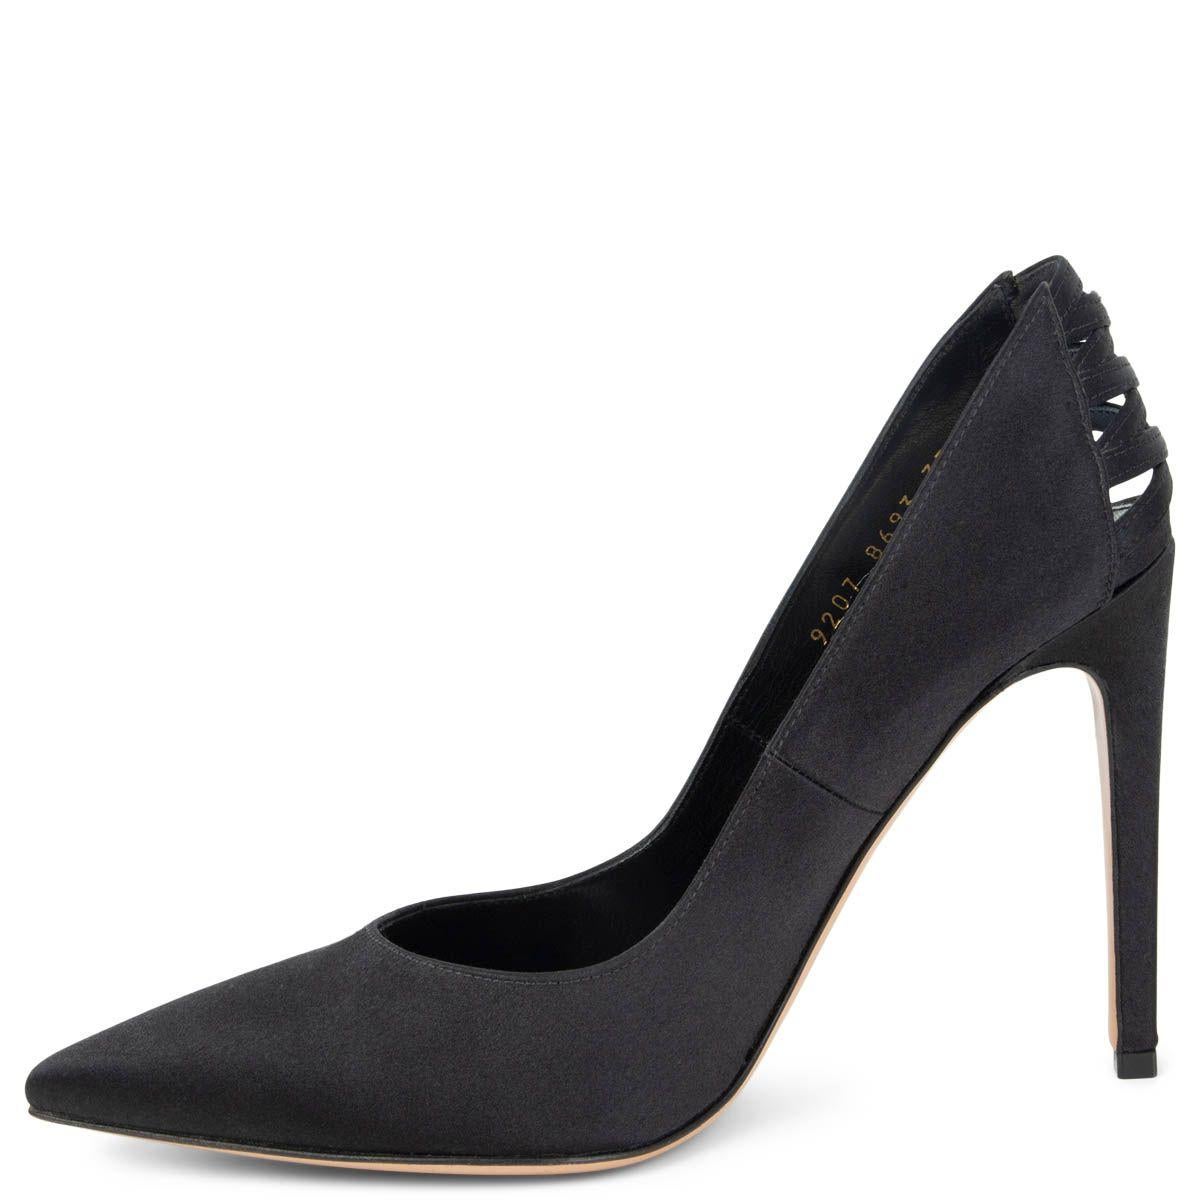 Black GIANVITO ROSSI black SATIN Pointed Toe Pumps Shoes 37 For Sale